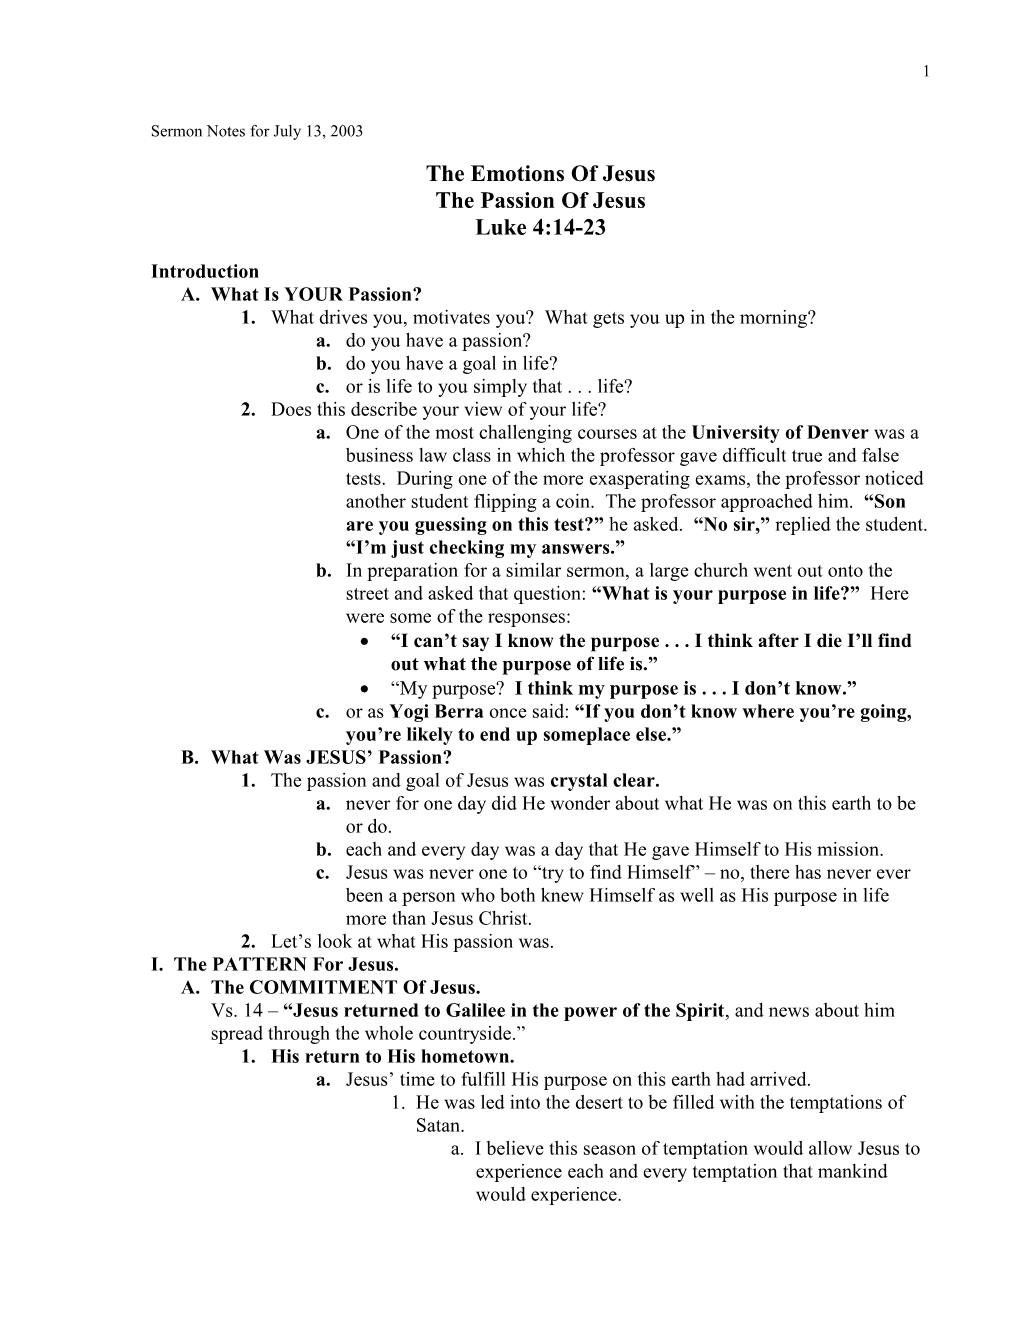 Sermon Notes for July 13, 2003